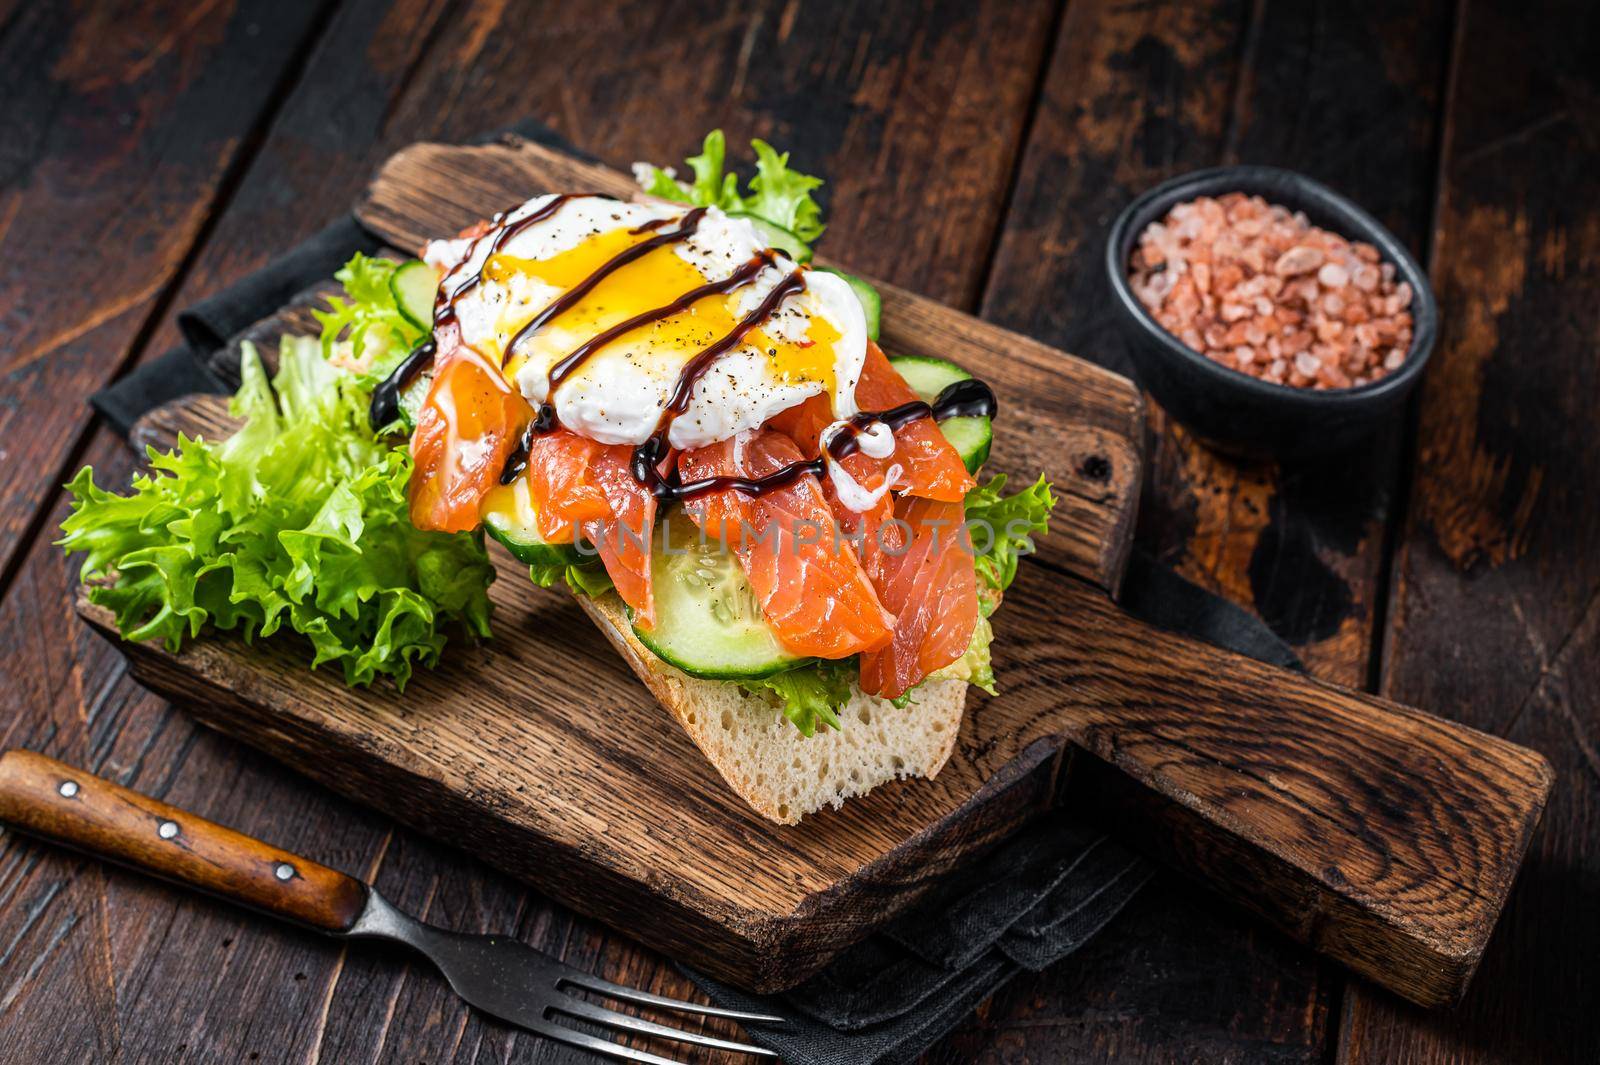 Smoked salmon Sandwich with Benedict egg and avocado on bread. Dark wooden background. Top view.